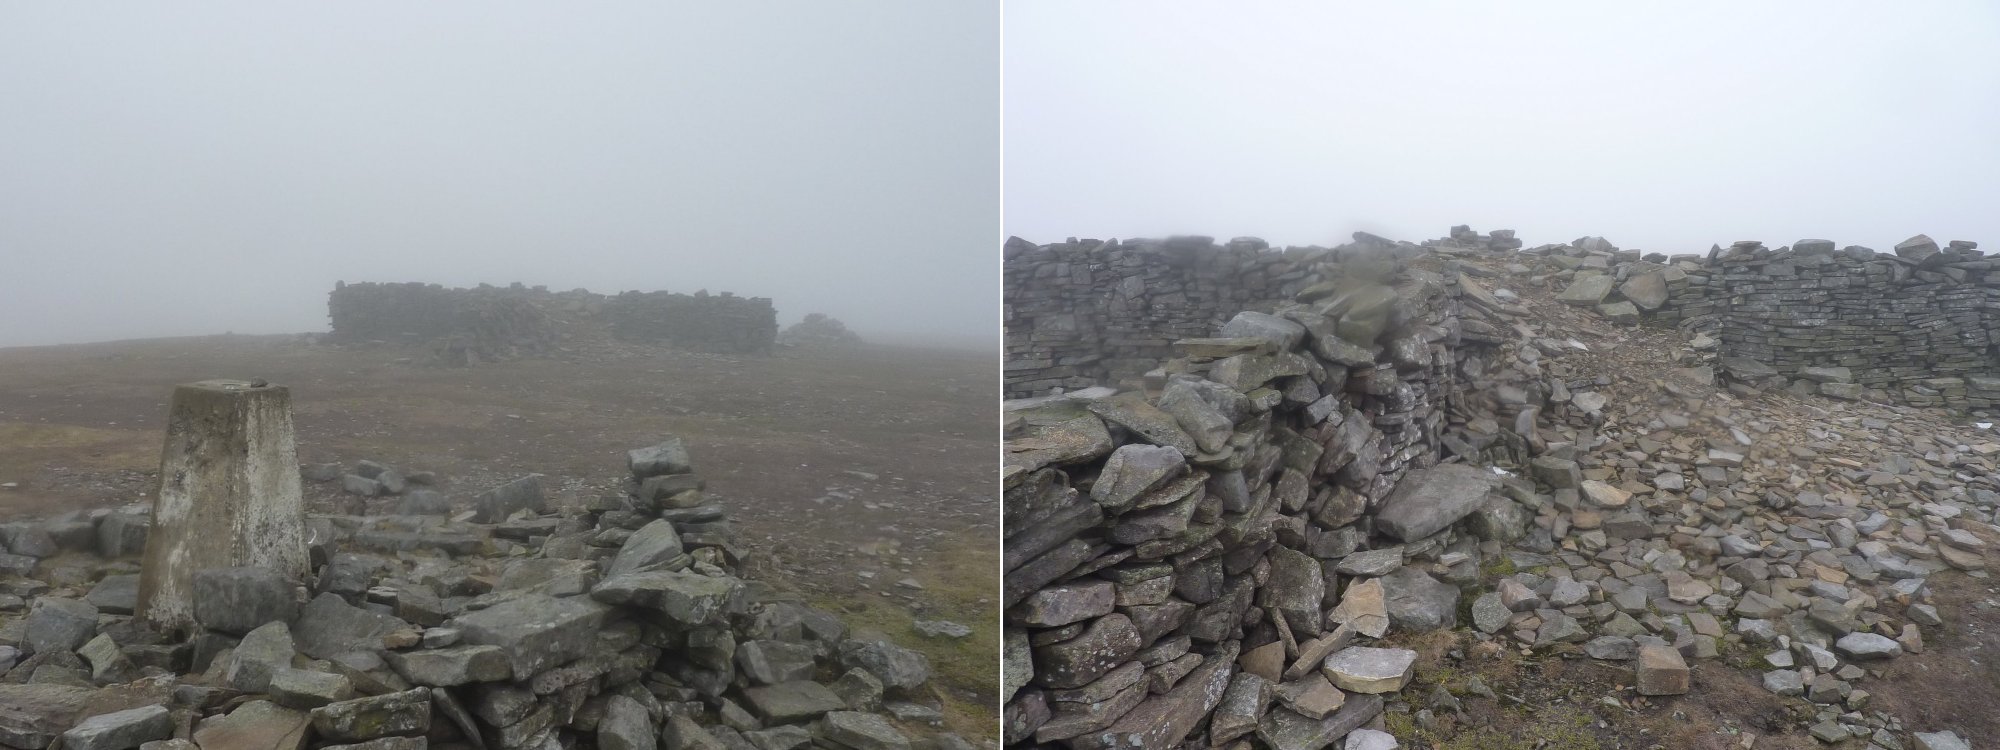 Left: Trig point and shelter on Cross Fell      Right: Mostly collapsed shelter on Cross Fell 